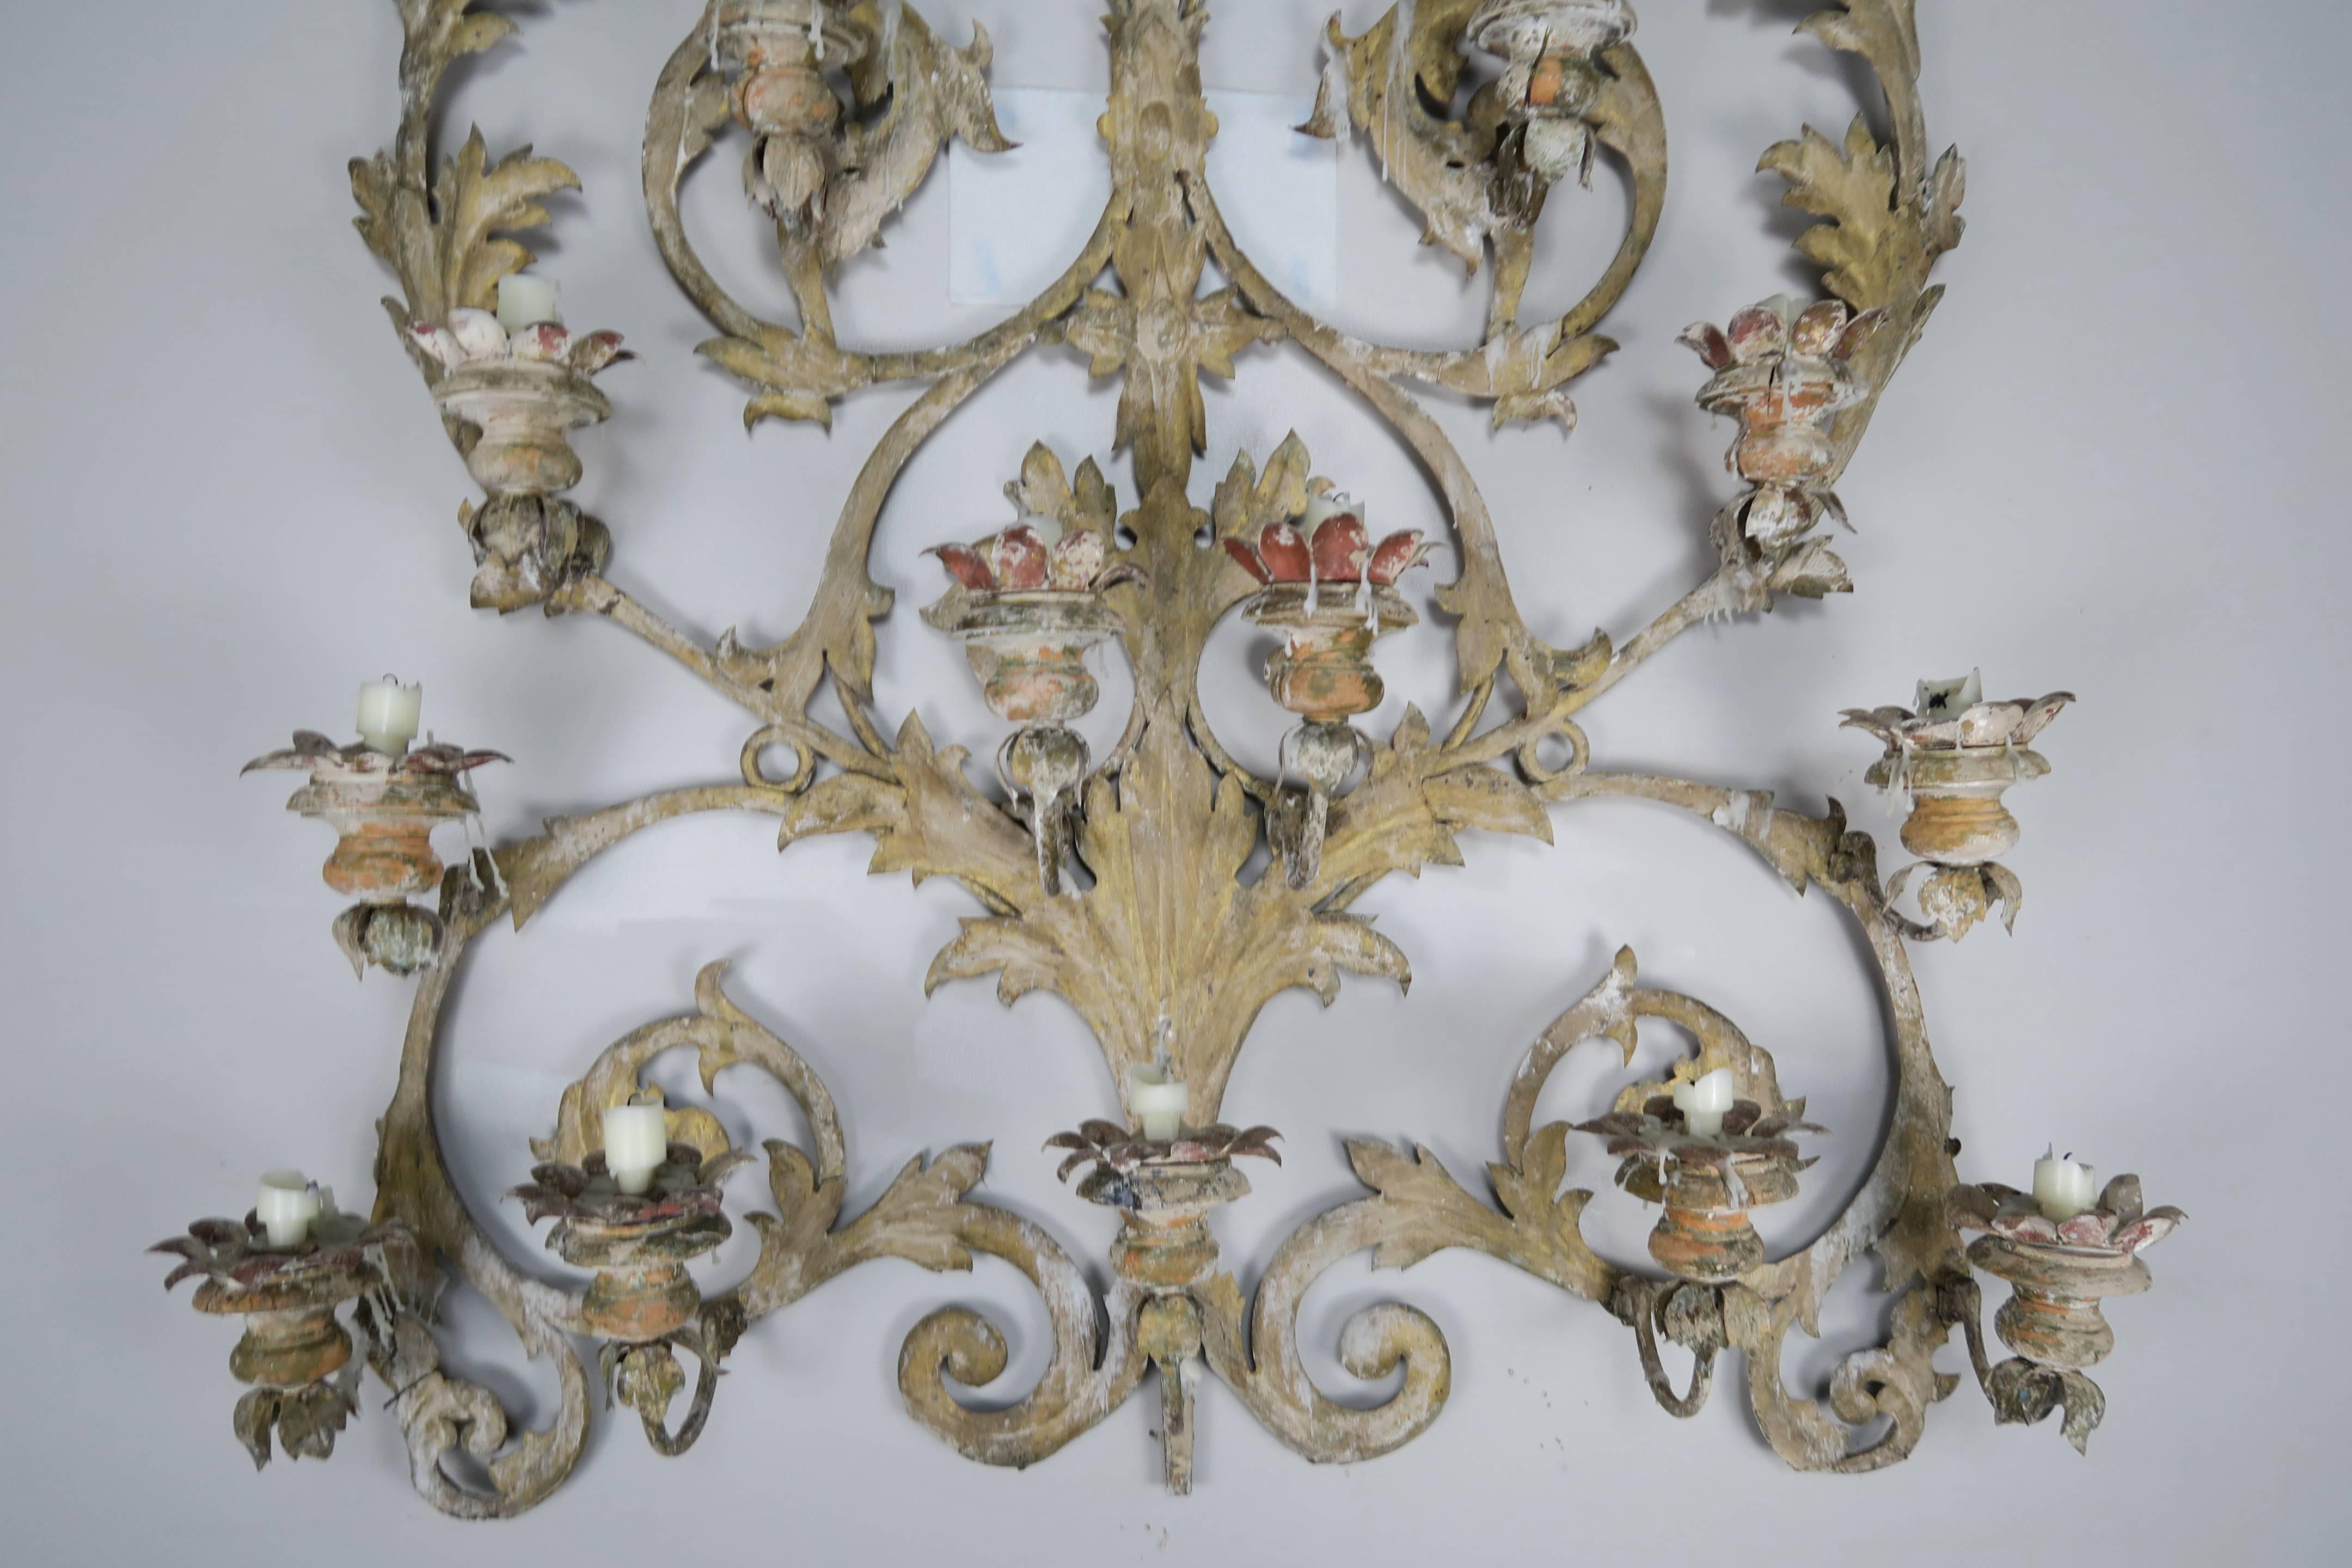 Rococo 19th Century Italian 16-Light Wall Ornament for Candles